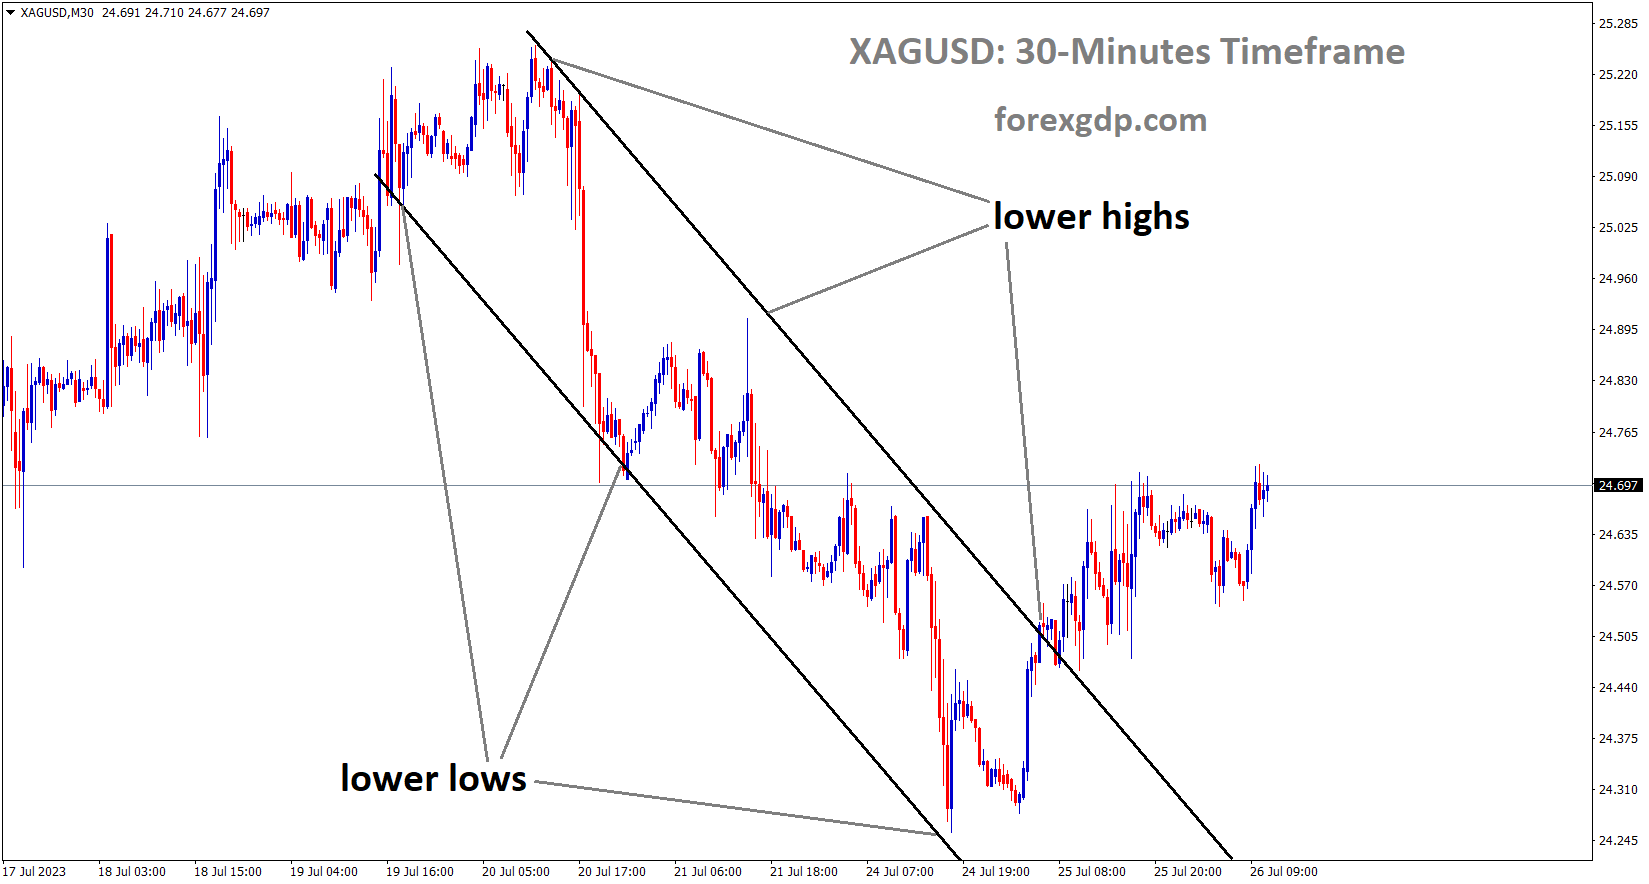 XAGUSD Silver price is moving in the Descending channel and the market has reached the lower high area of the channel 3